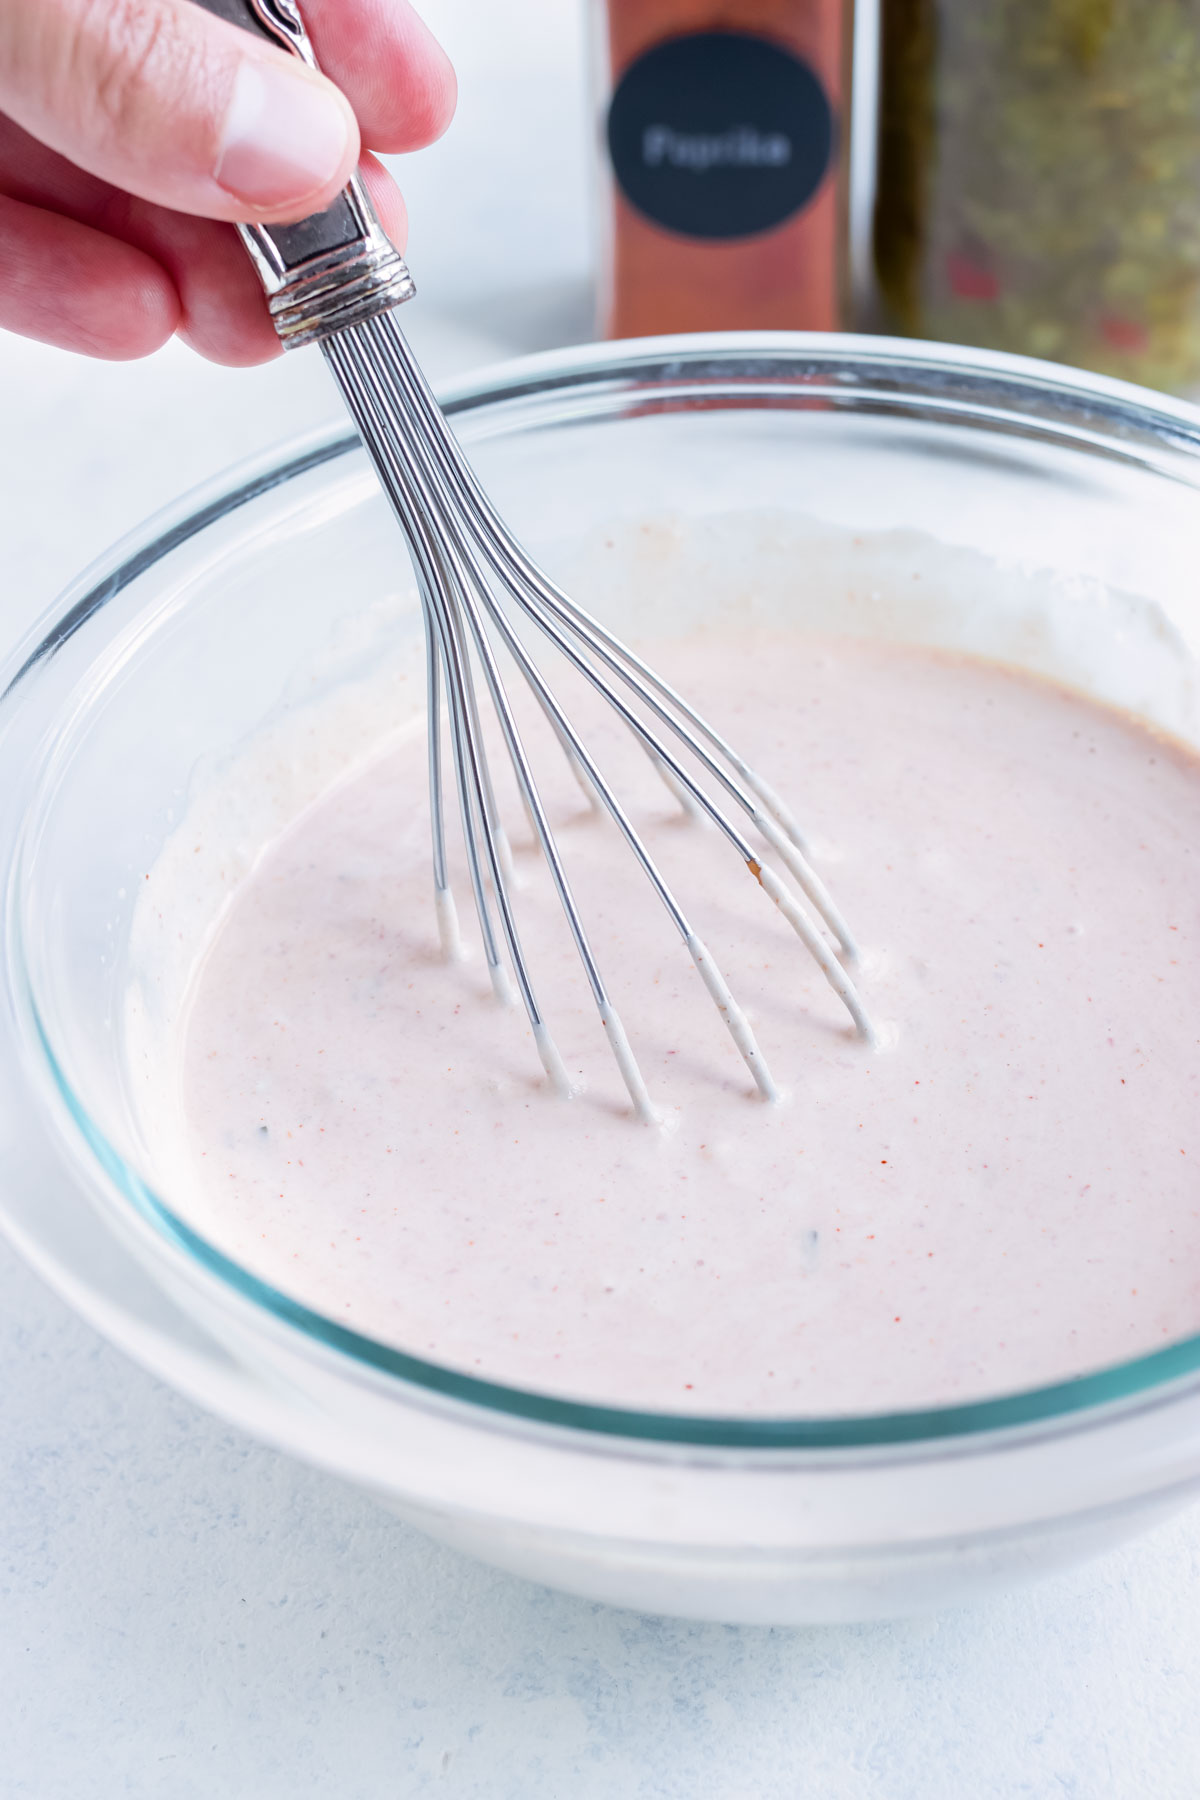 Creamy thousand island dressing is made in a glass bowl.